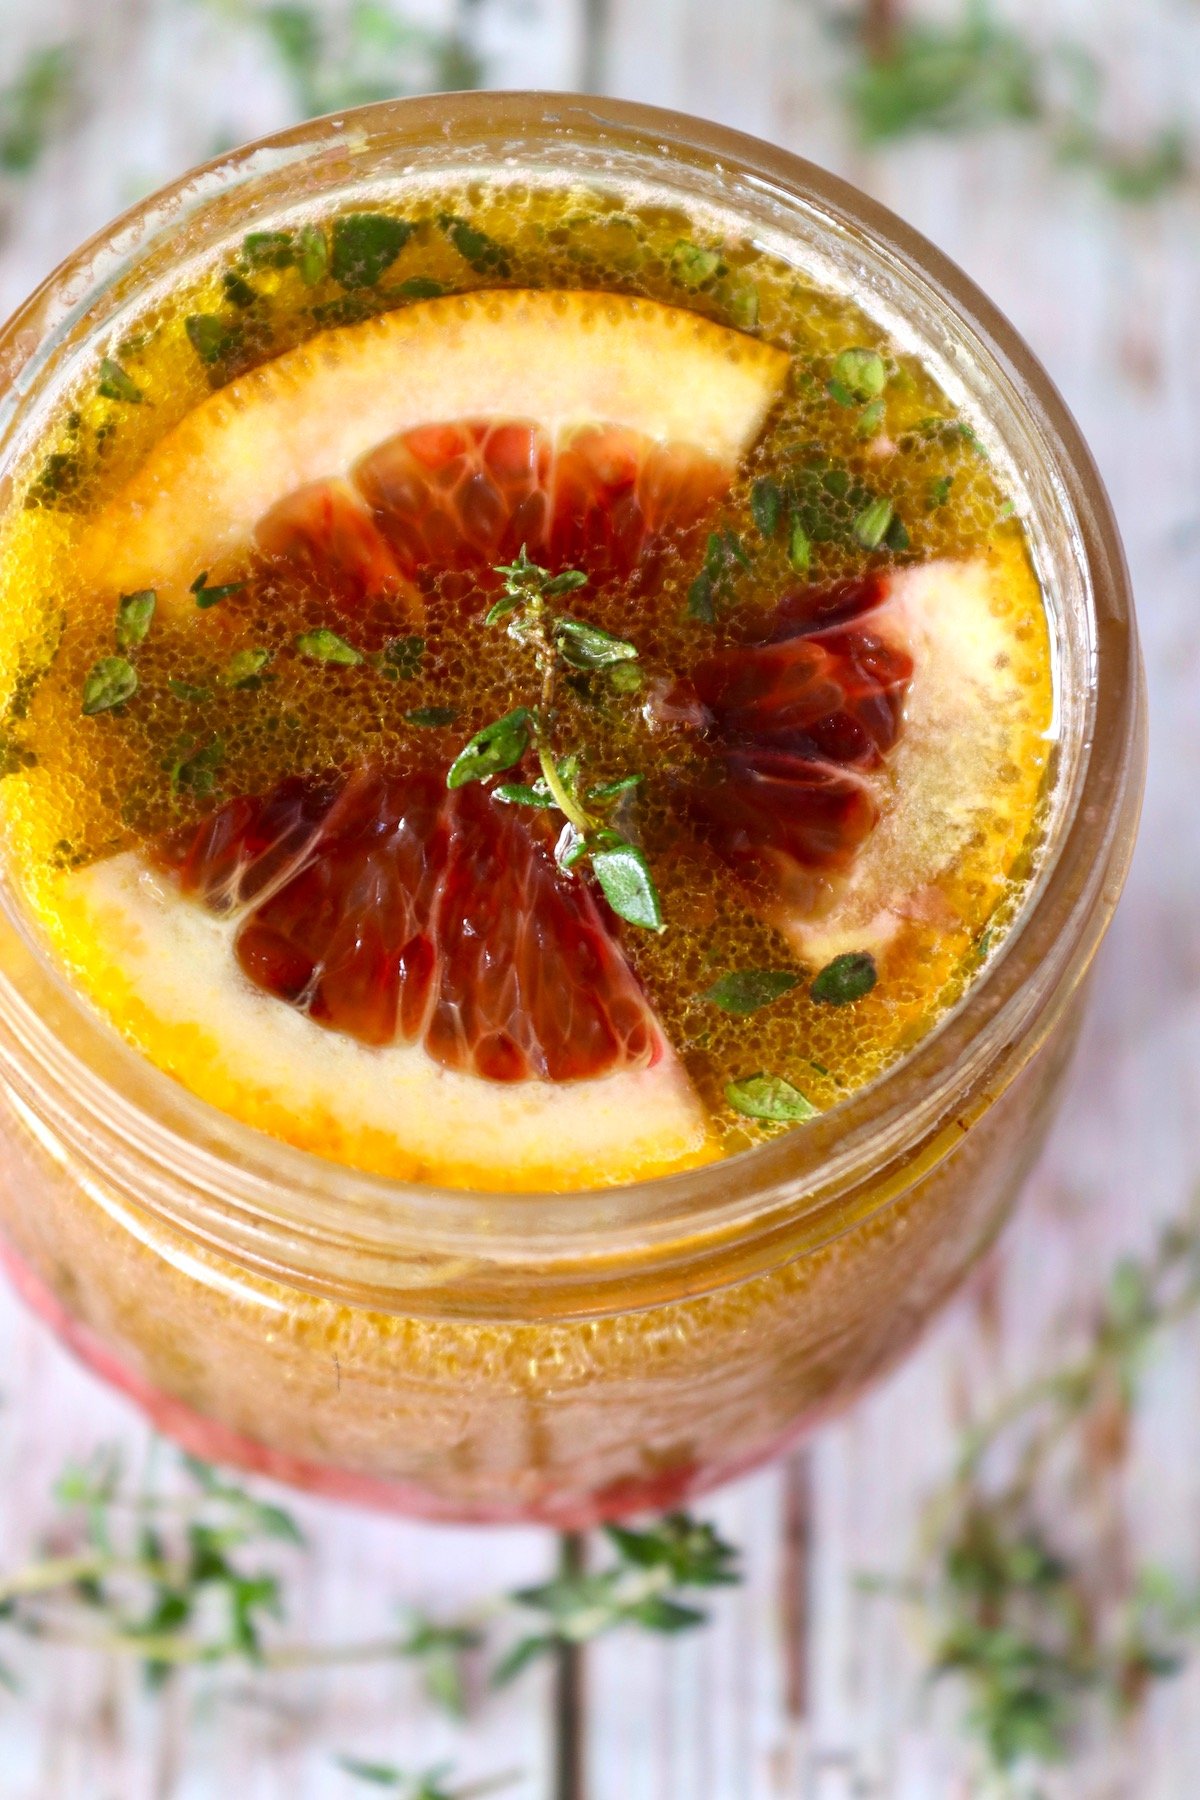 Top view of a rounded jar with blood orange vinaigrette with a sprig of thyme on top.